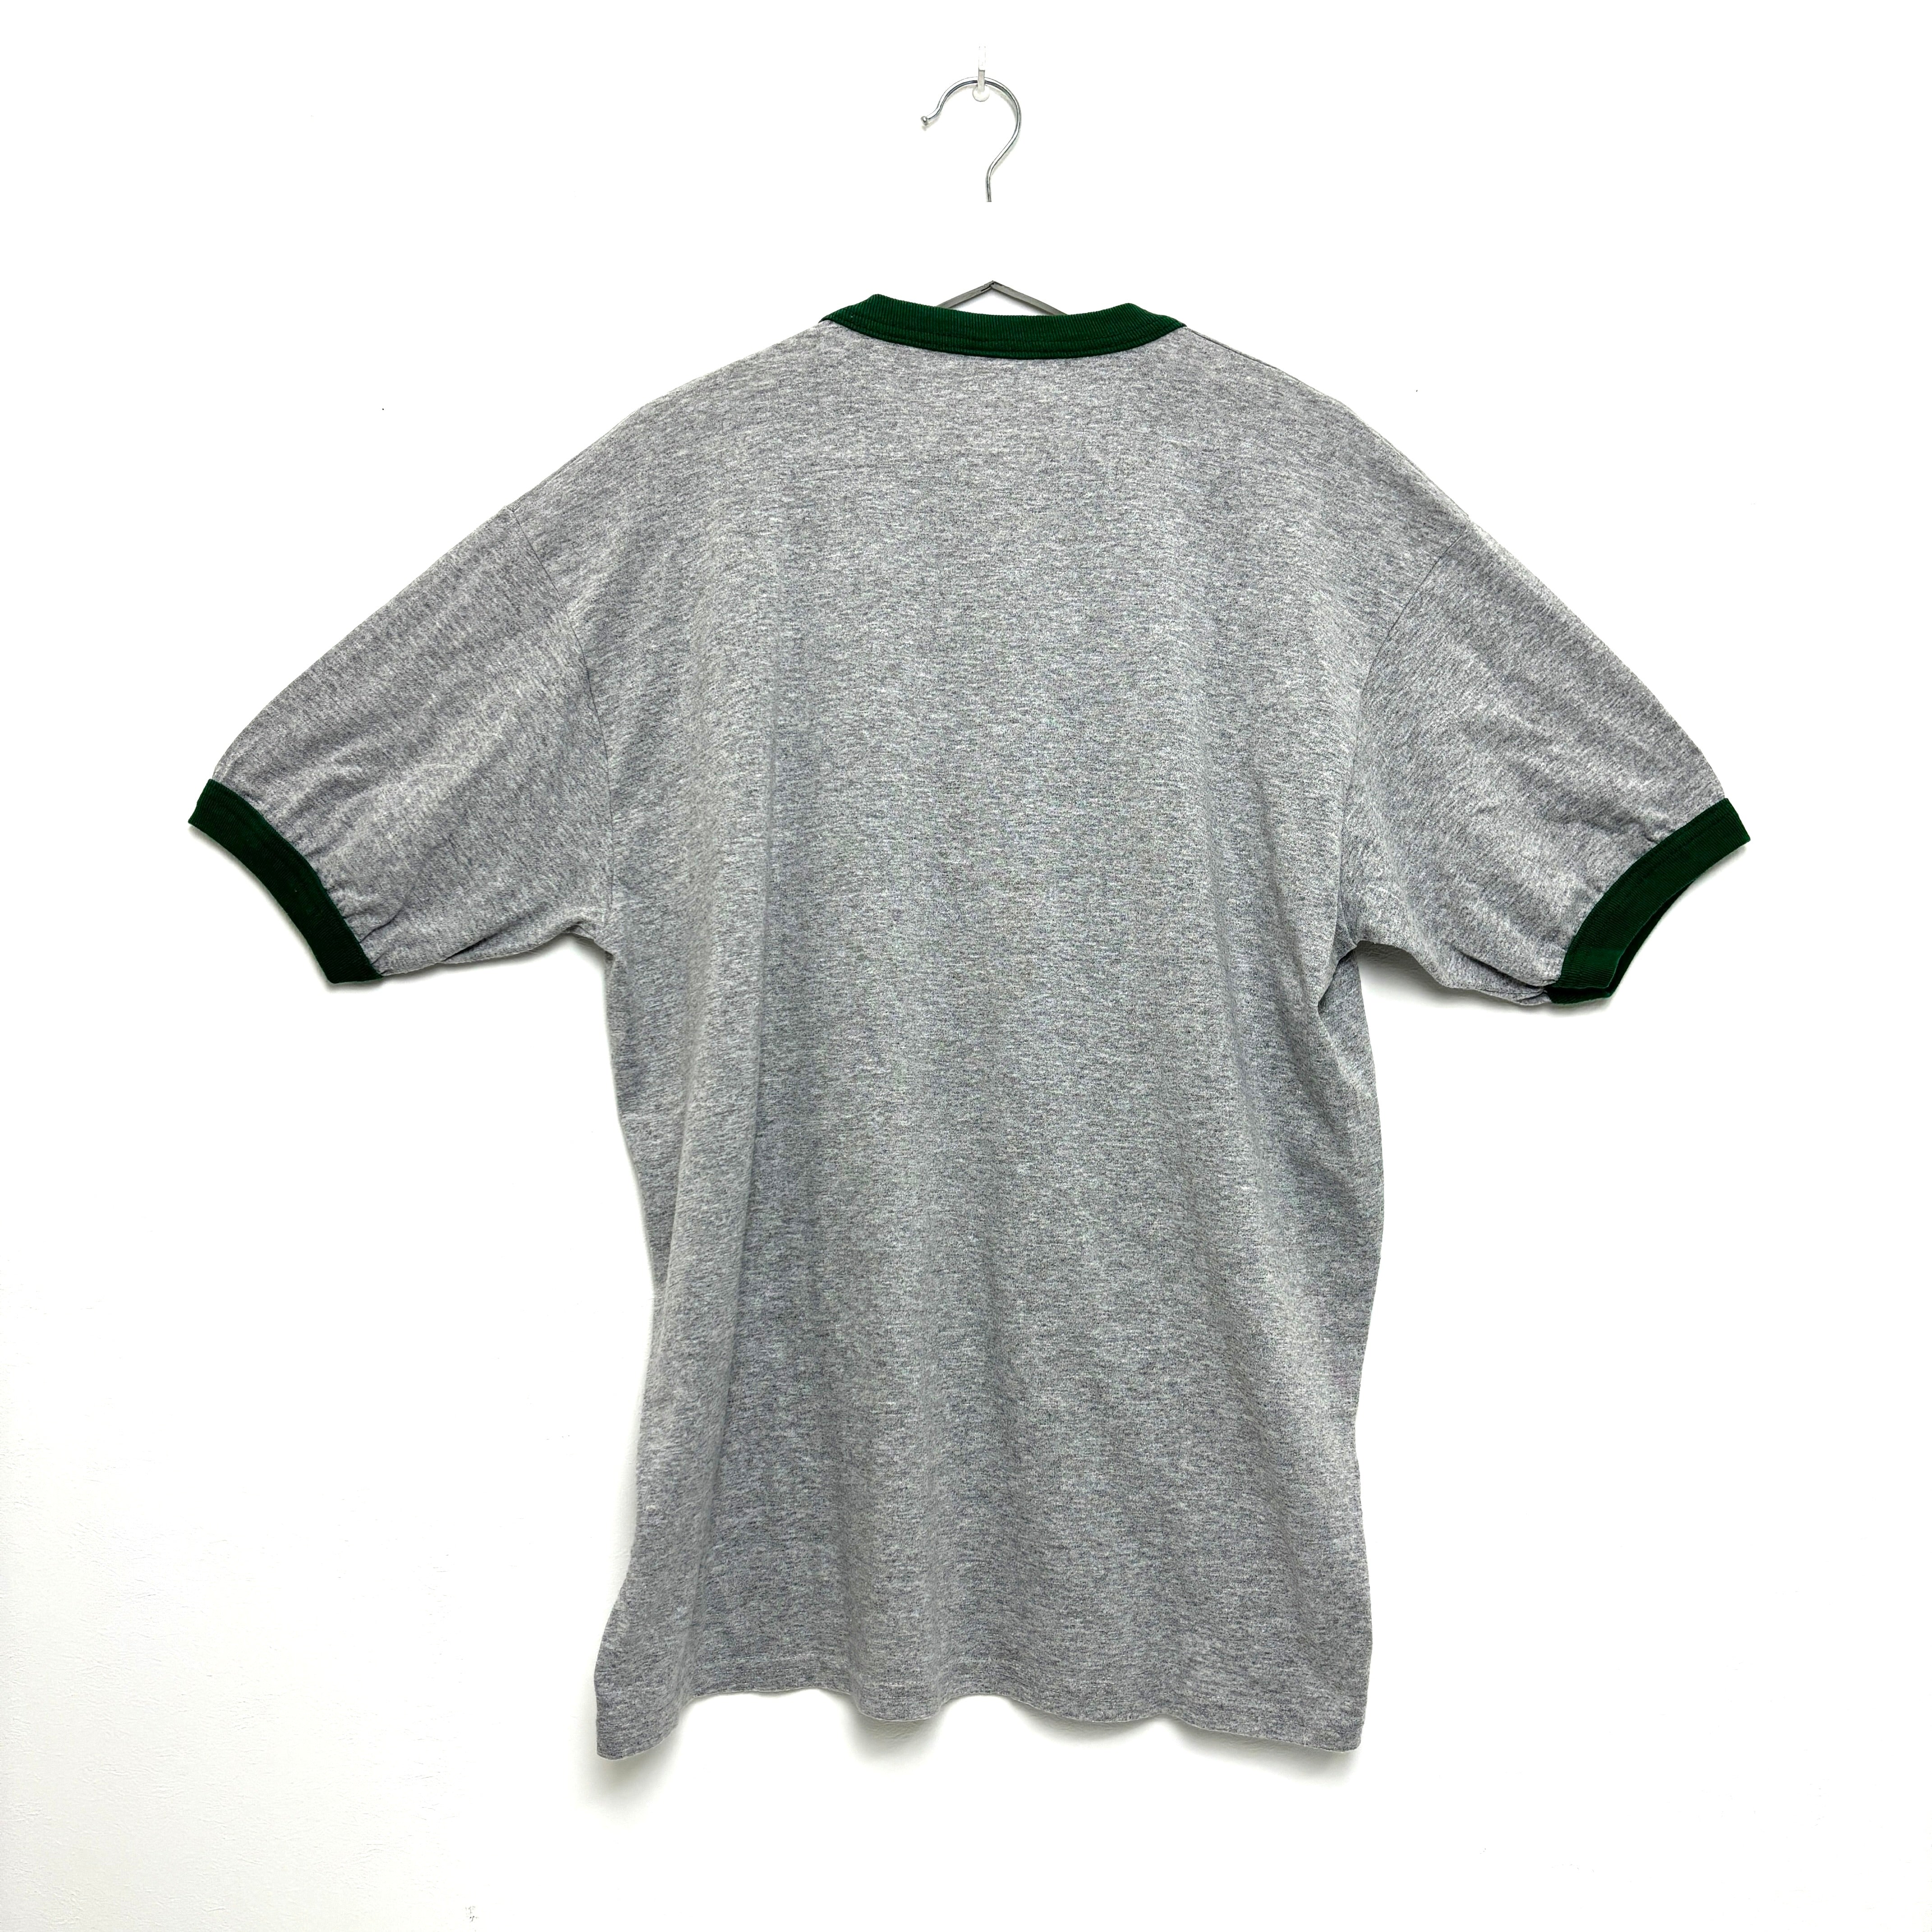 August Ringer T-shirt Property of Three Oaks Eagles Gray and Green Tee